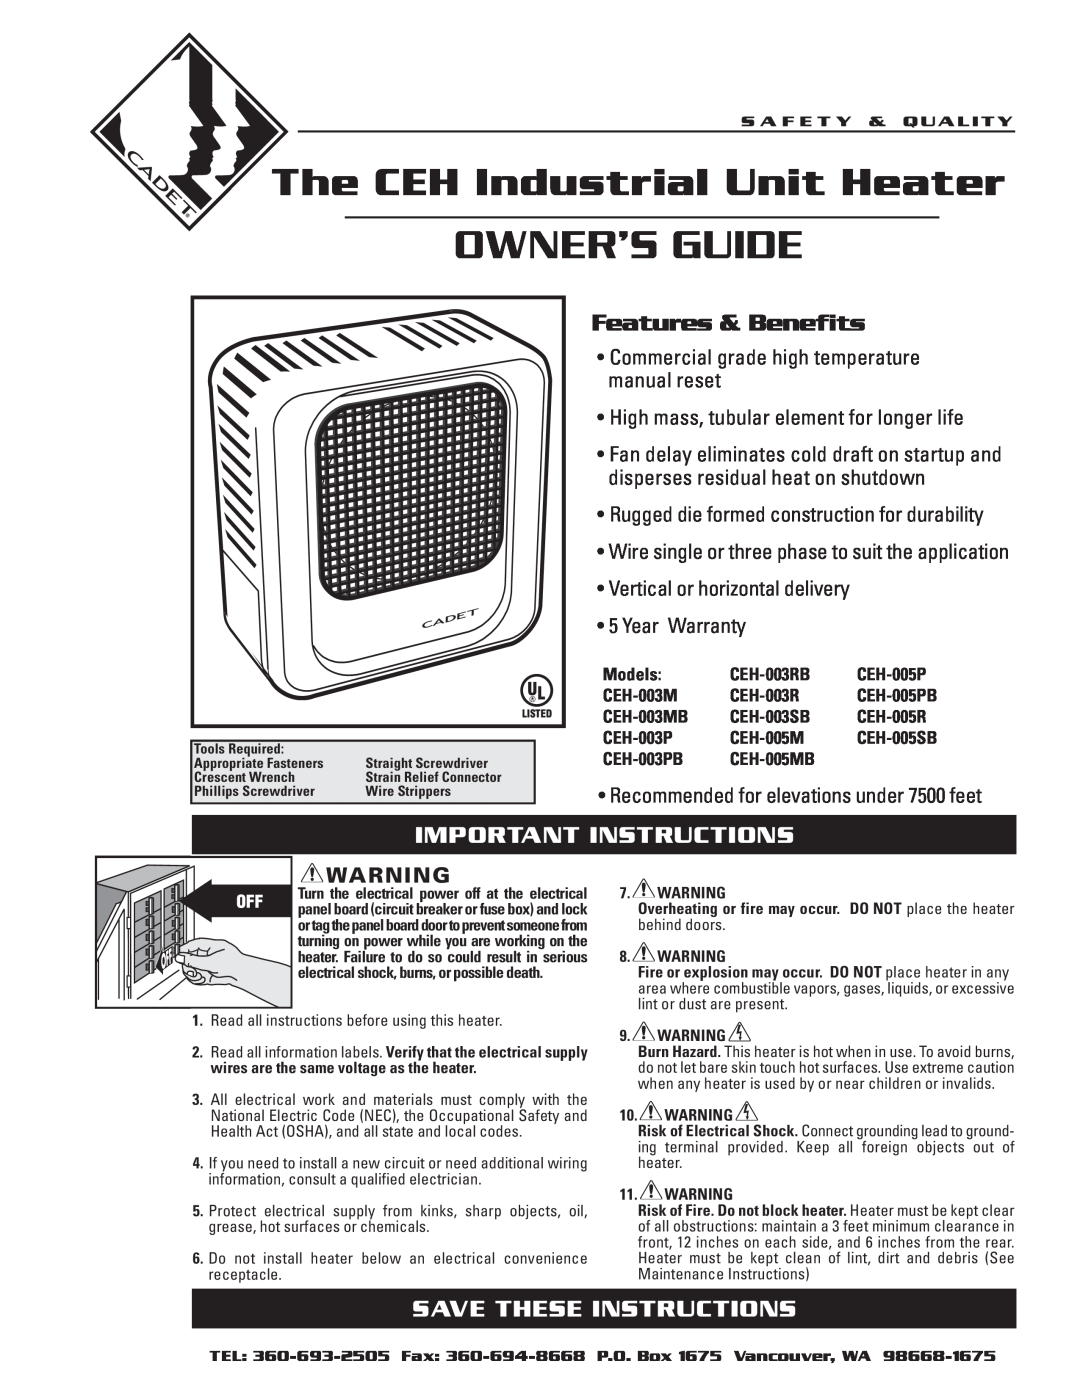 Cadet CEH-005MB, CEH-005P warranty Features & Benefits, Important Instructions, Save These Instructions, Owner’S Guide 